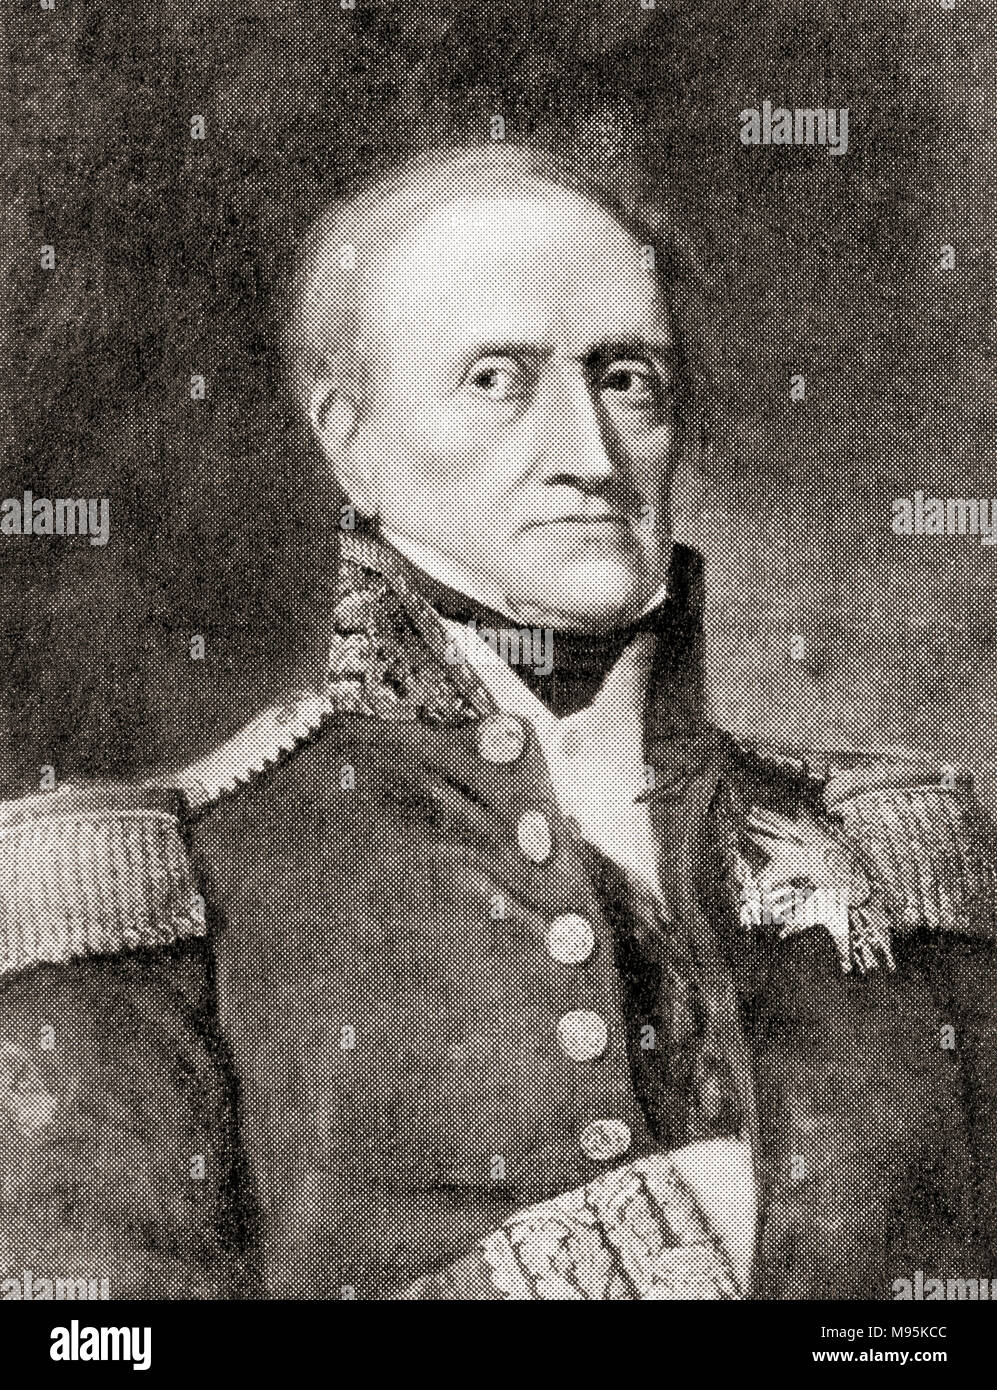 Marshal General Jean-de-Dieu Soult, 1st Duke of Dalmatia, 1769 – 1851.  French general, statesman, Marshal of the Empire and 10th Prime Minister of France.  From Hutchinson's History of the Nations, published 1915 Stock Photo